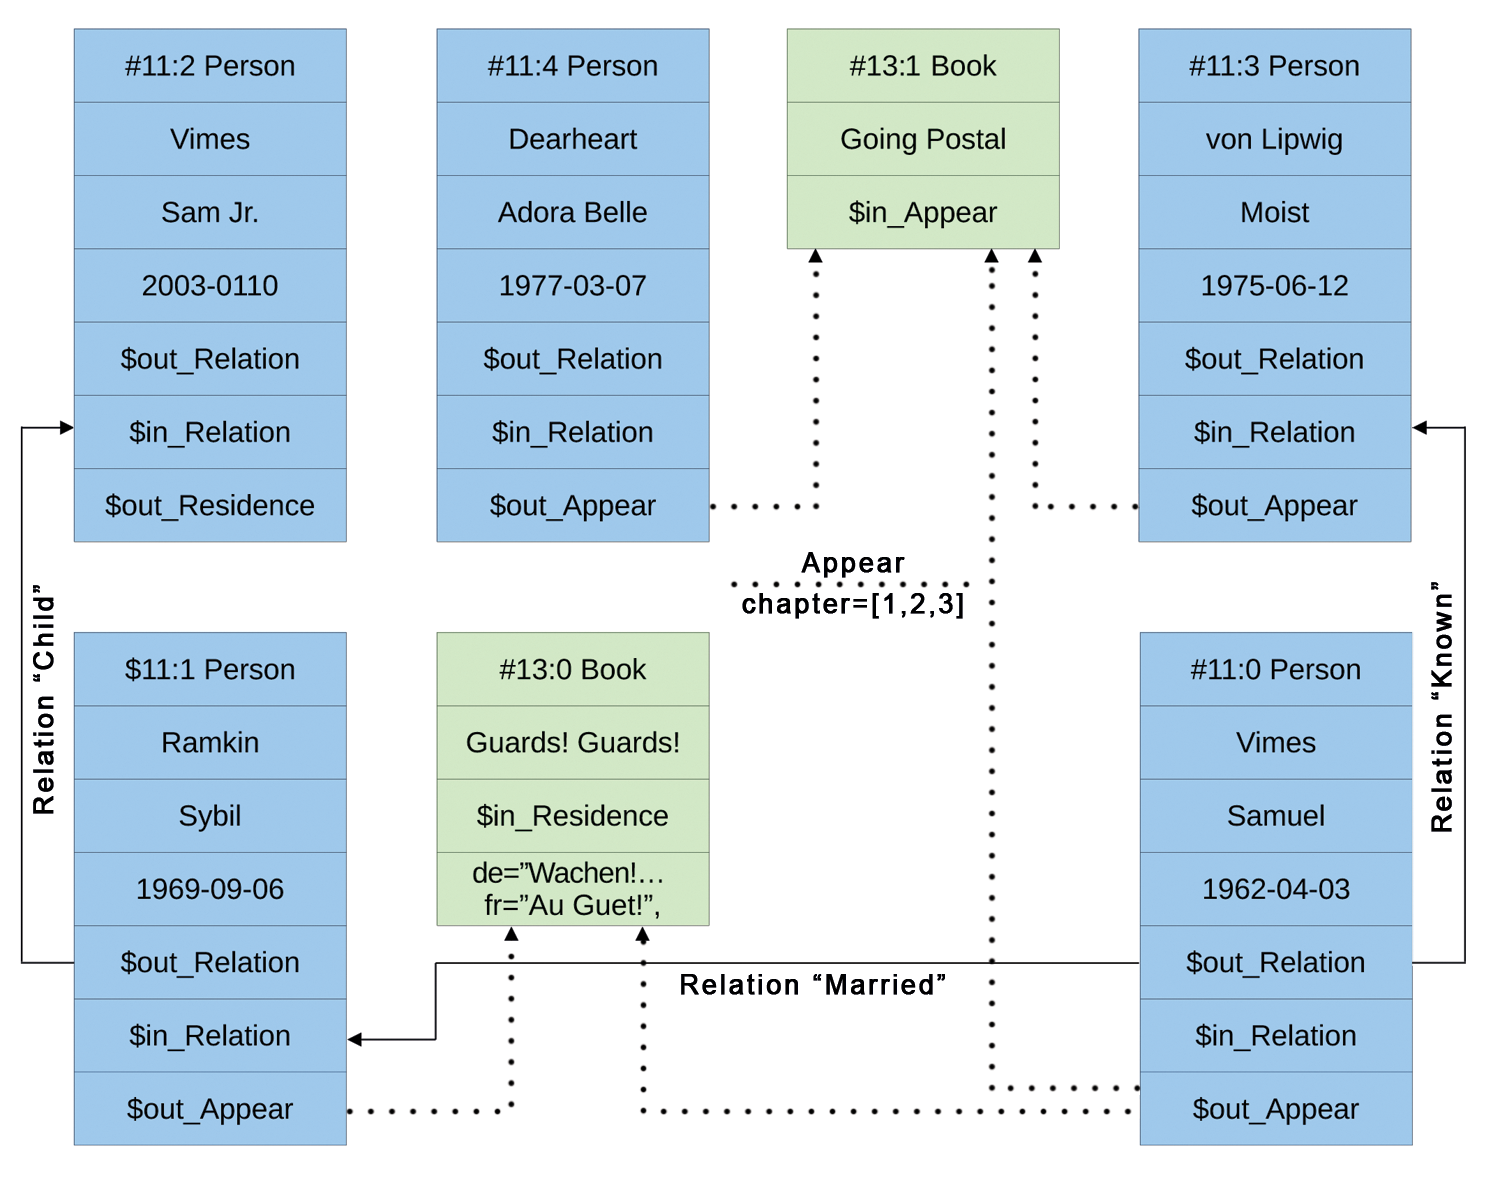 This example database details the relationships between the characters of the Discworld series. 